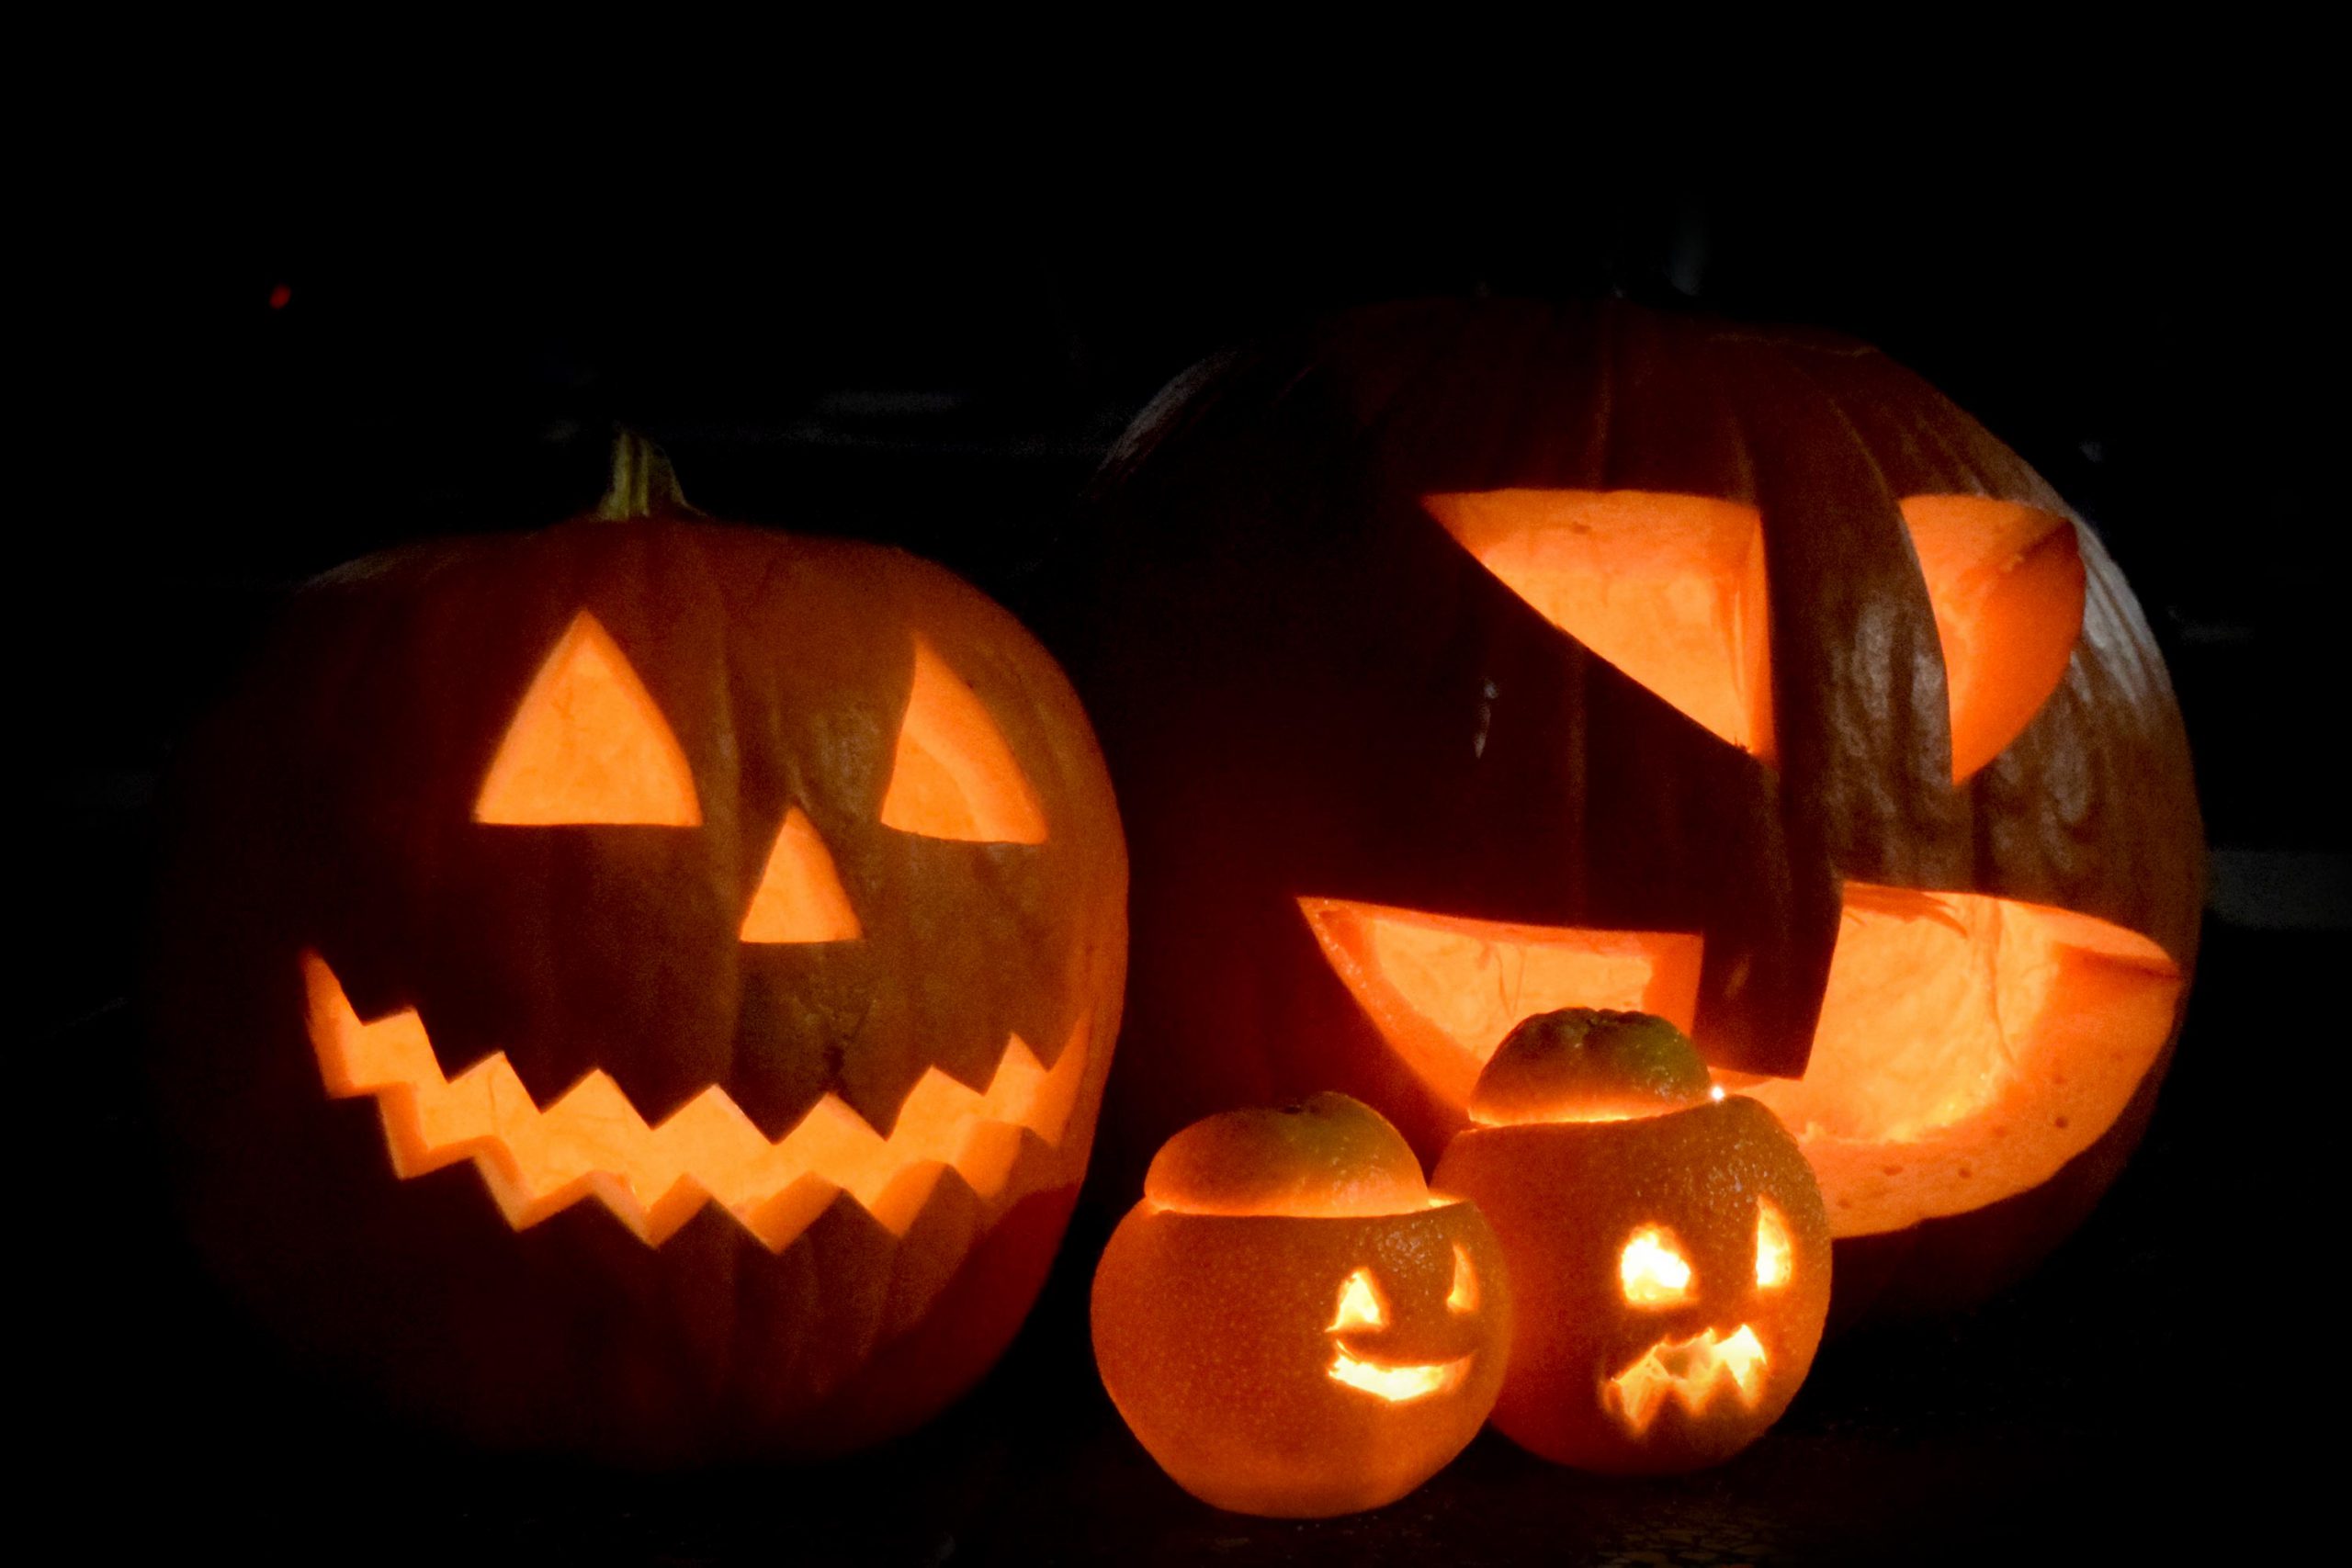 Scary Halloween Wallpaper 2021 HD, Background, Pumpkins, Witches, Bats & Ghosts